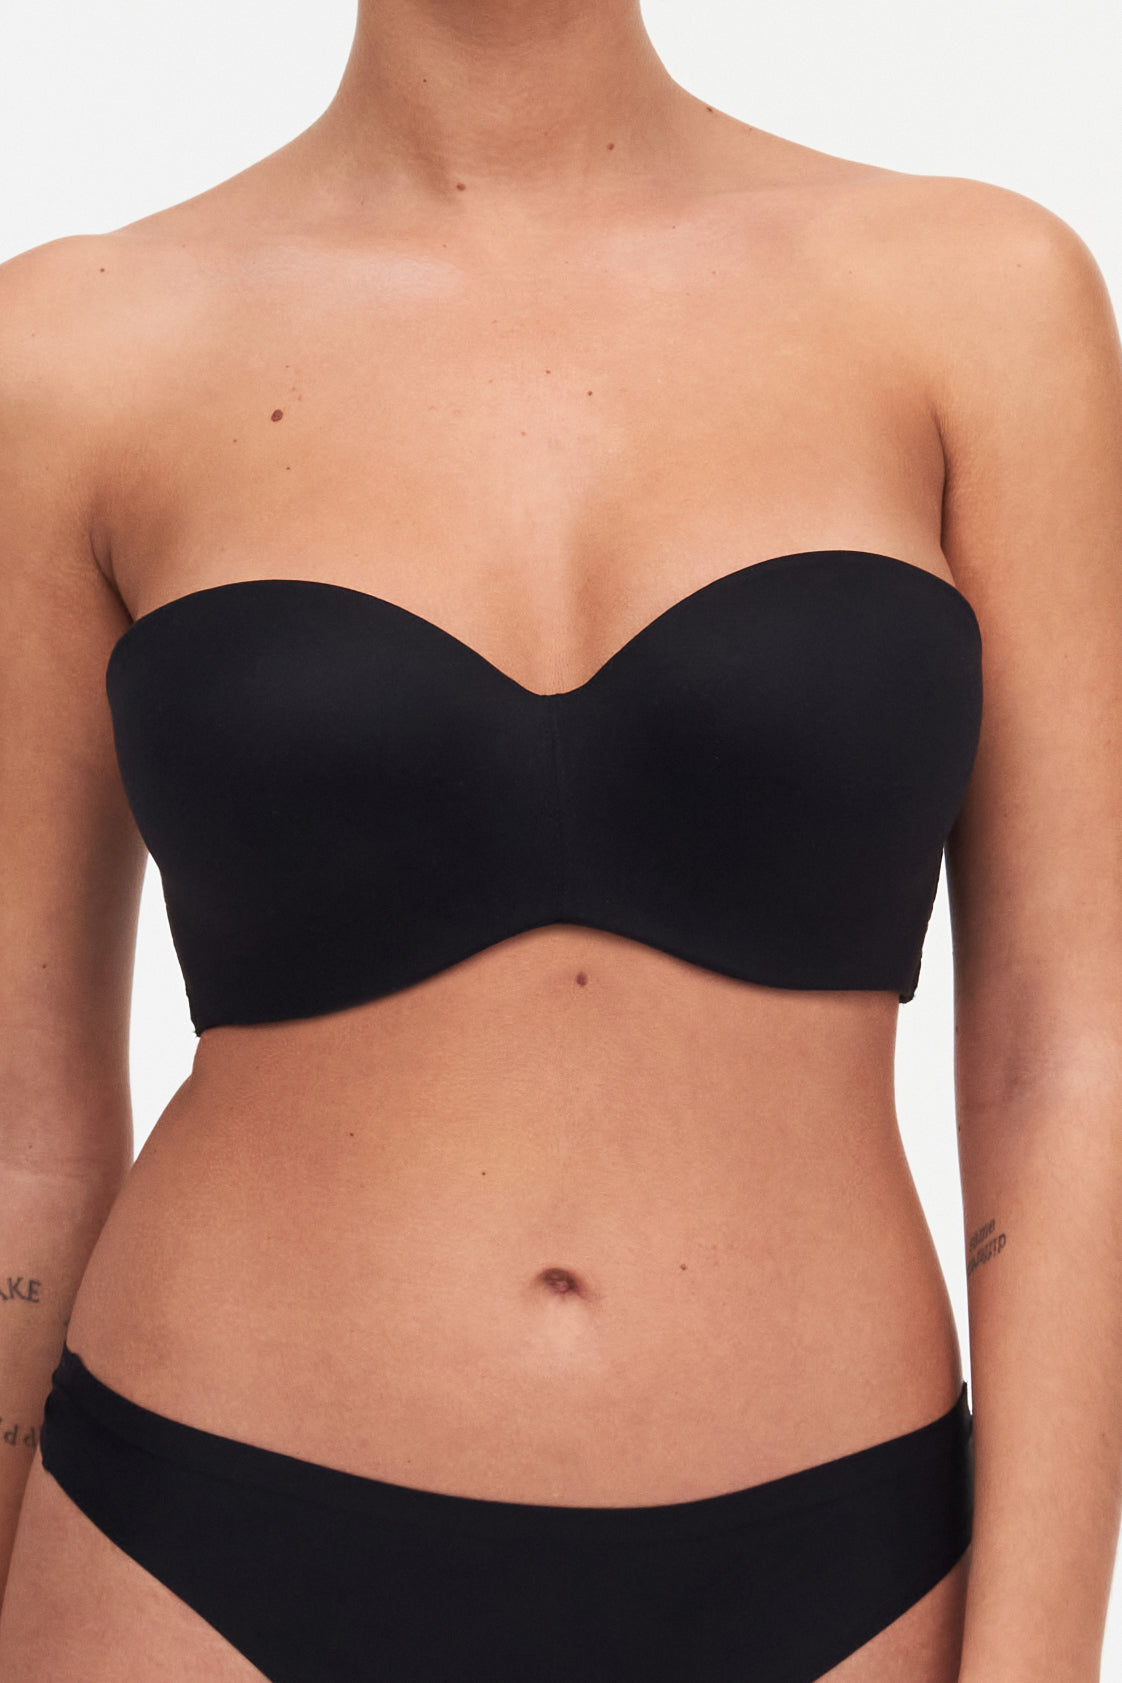 Chantelle - Graphic Allure Plunge T-shirt - 21T2 - The Bra Spa - Bra  Fitting Experts in Tucson, AZ